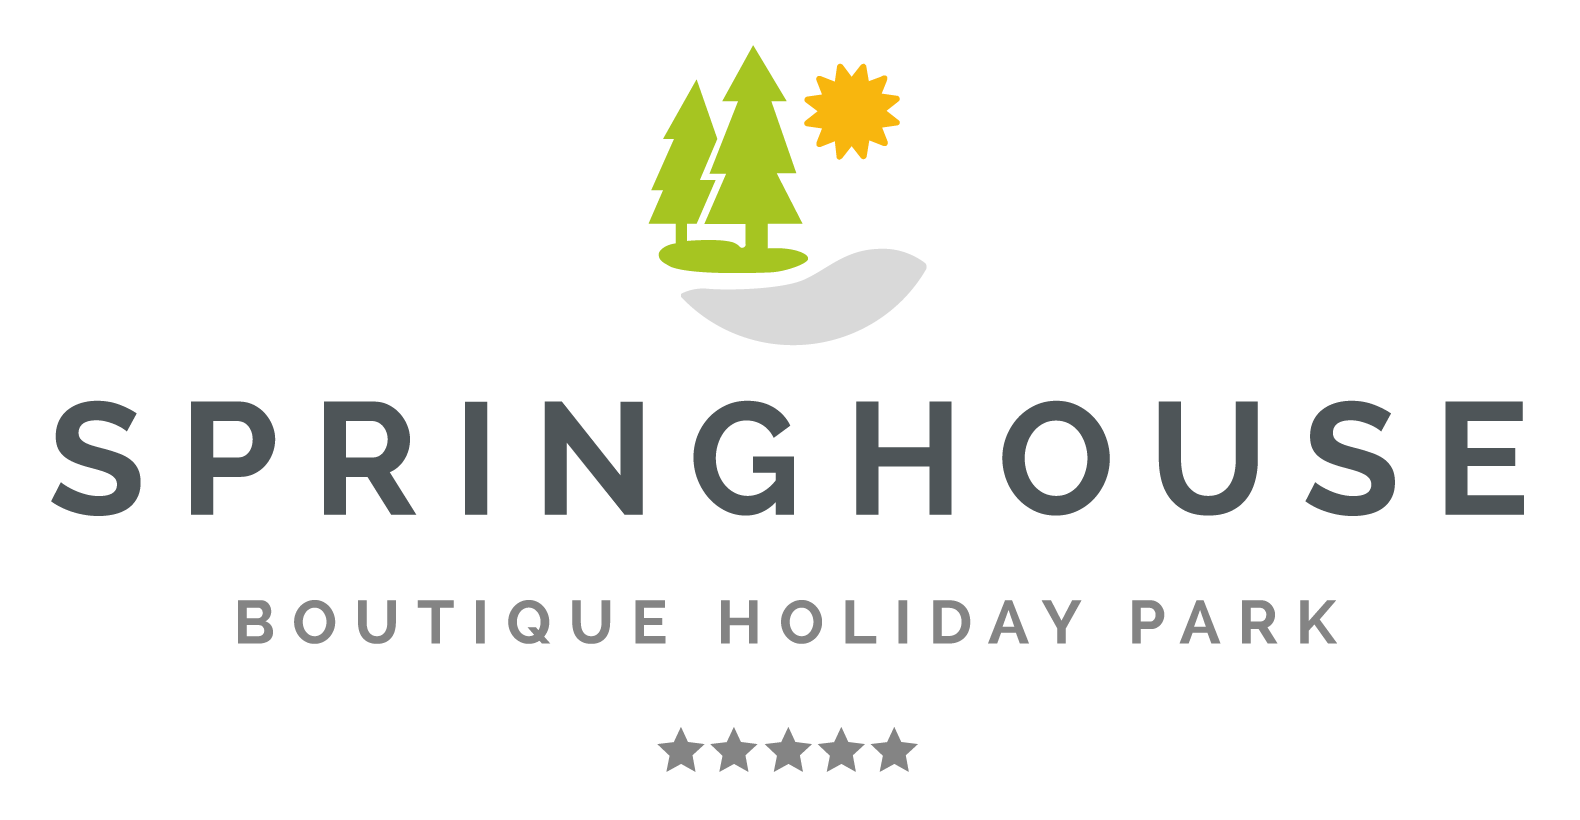 Springhouse Holiday touring caravans